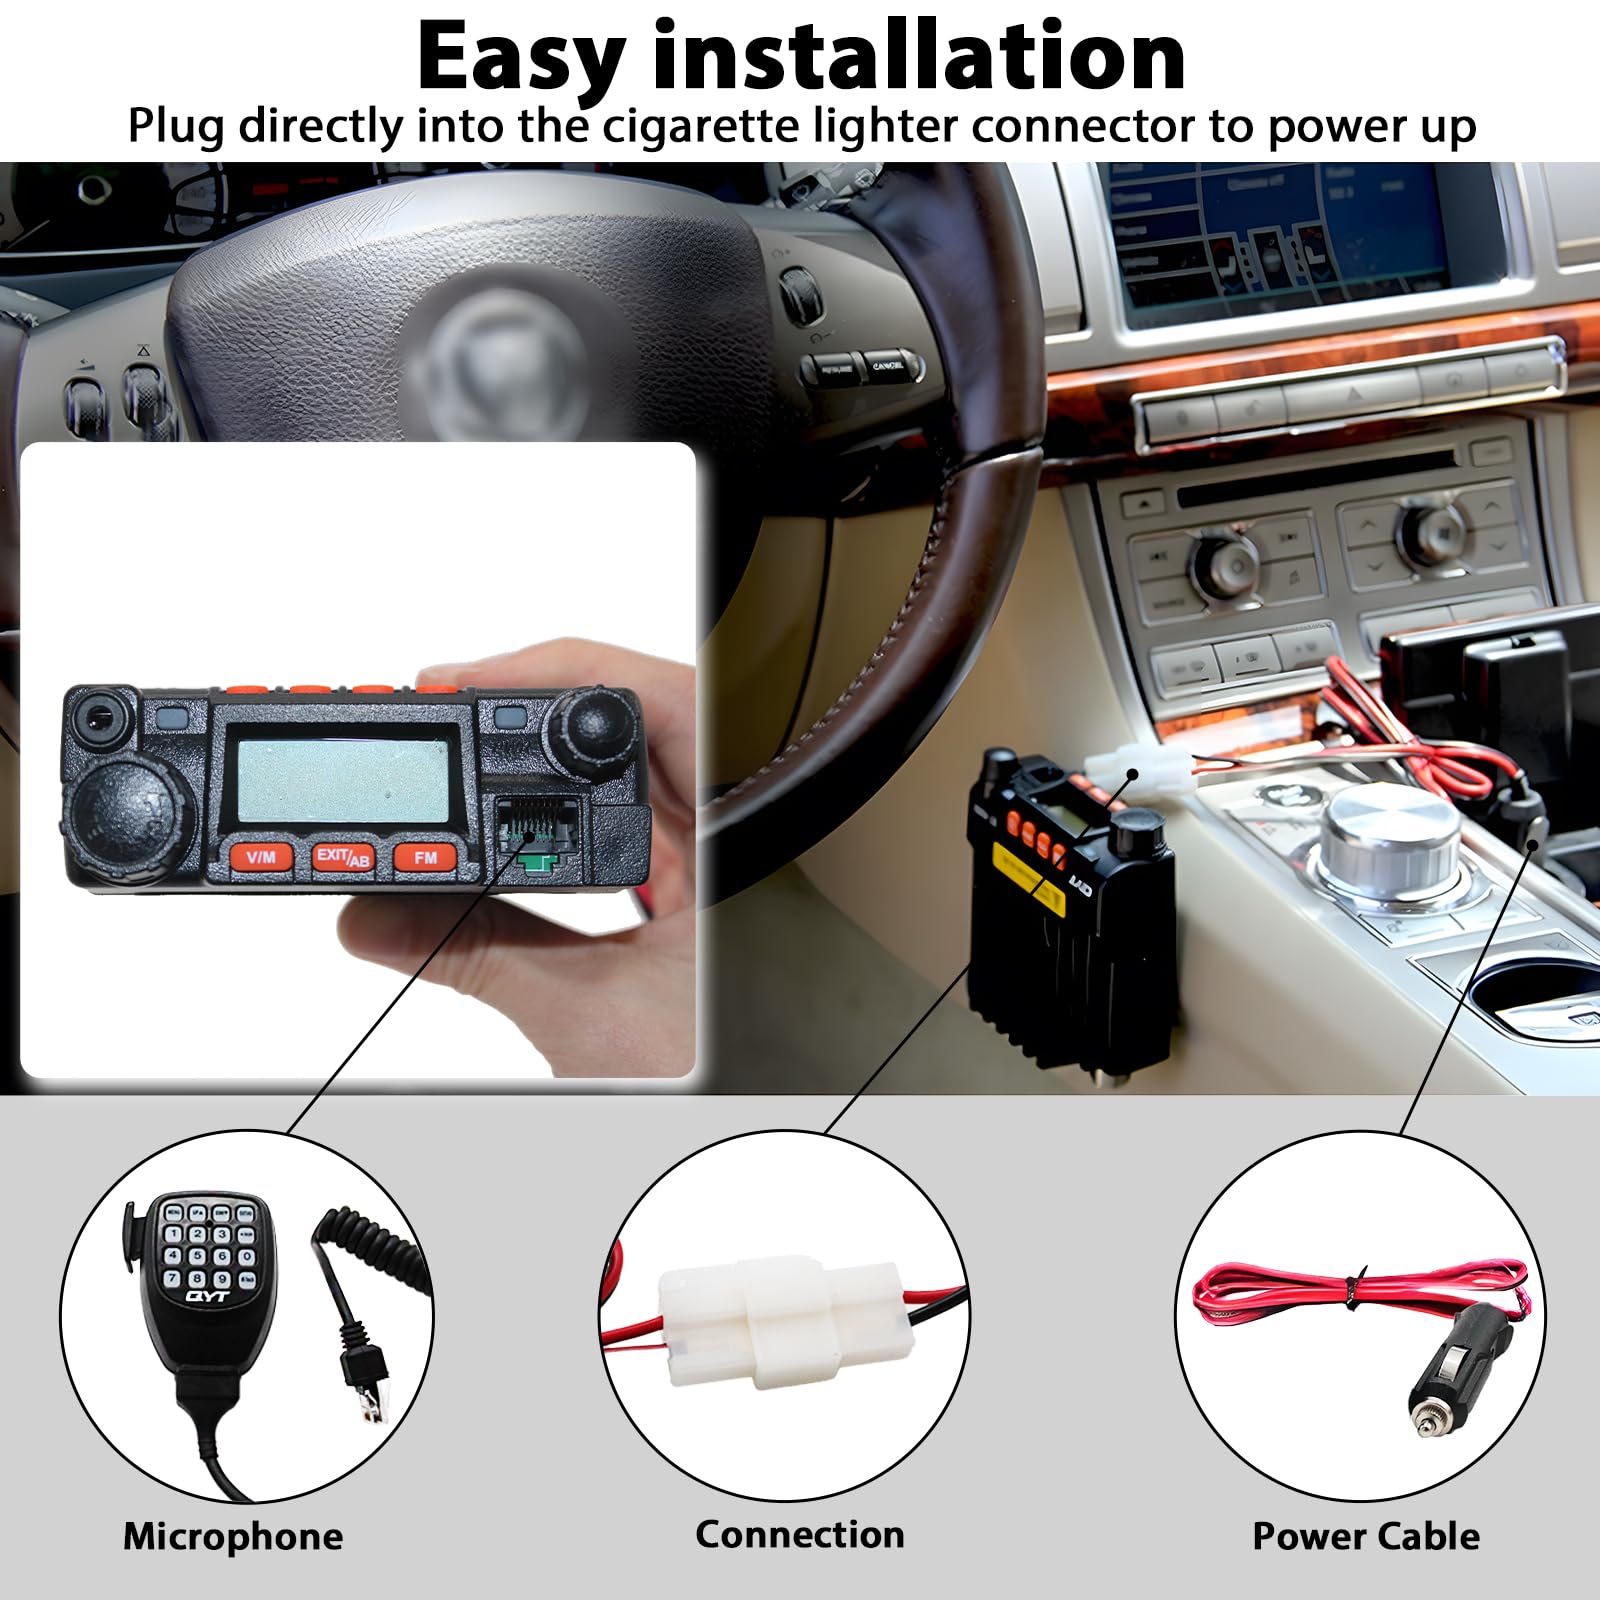 UV Dual Band Car Radio with Carplay, 136-174/400-480MHz 13.8V Experience high quality, long range communication and superior band performance. With advanced dual-band technology and 20 watts of power, you can easily tune to two different frequencies and transmit simultaneously. Enjoy clear, reliable communications in any situation, from your daily commute to your next road trip.